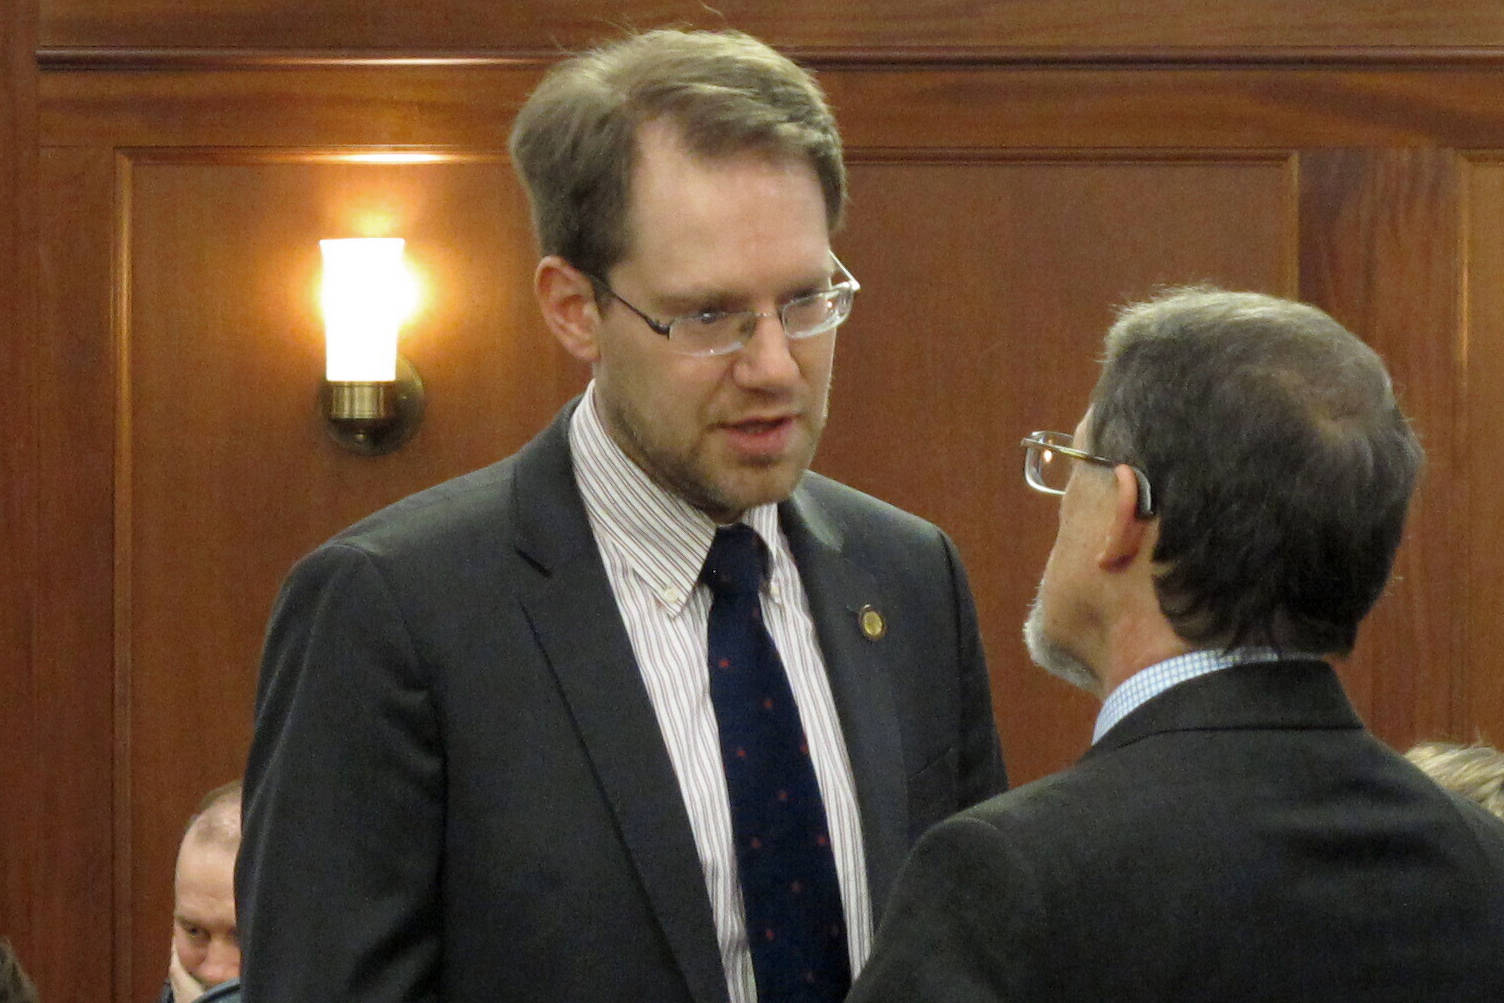 FILE - In this March 5, 2020 file photo, Alaska Republican House Minority Leader Lance Pruitt, left, speaks with Rep. George Rauscher on the floor of the House in Juneau, Alaska. Pruitt, of Anchorage, is challenging in court his 11-vote loss in a state House race to Democrat Liz Snyder. (AP Photo/Becky Bohrer, File)